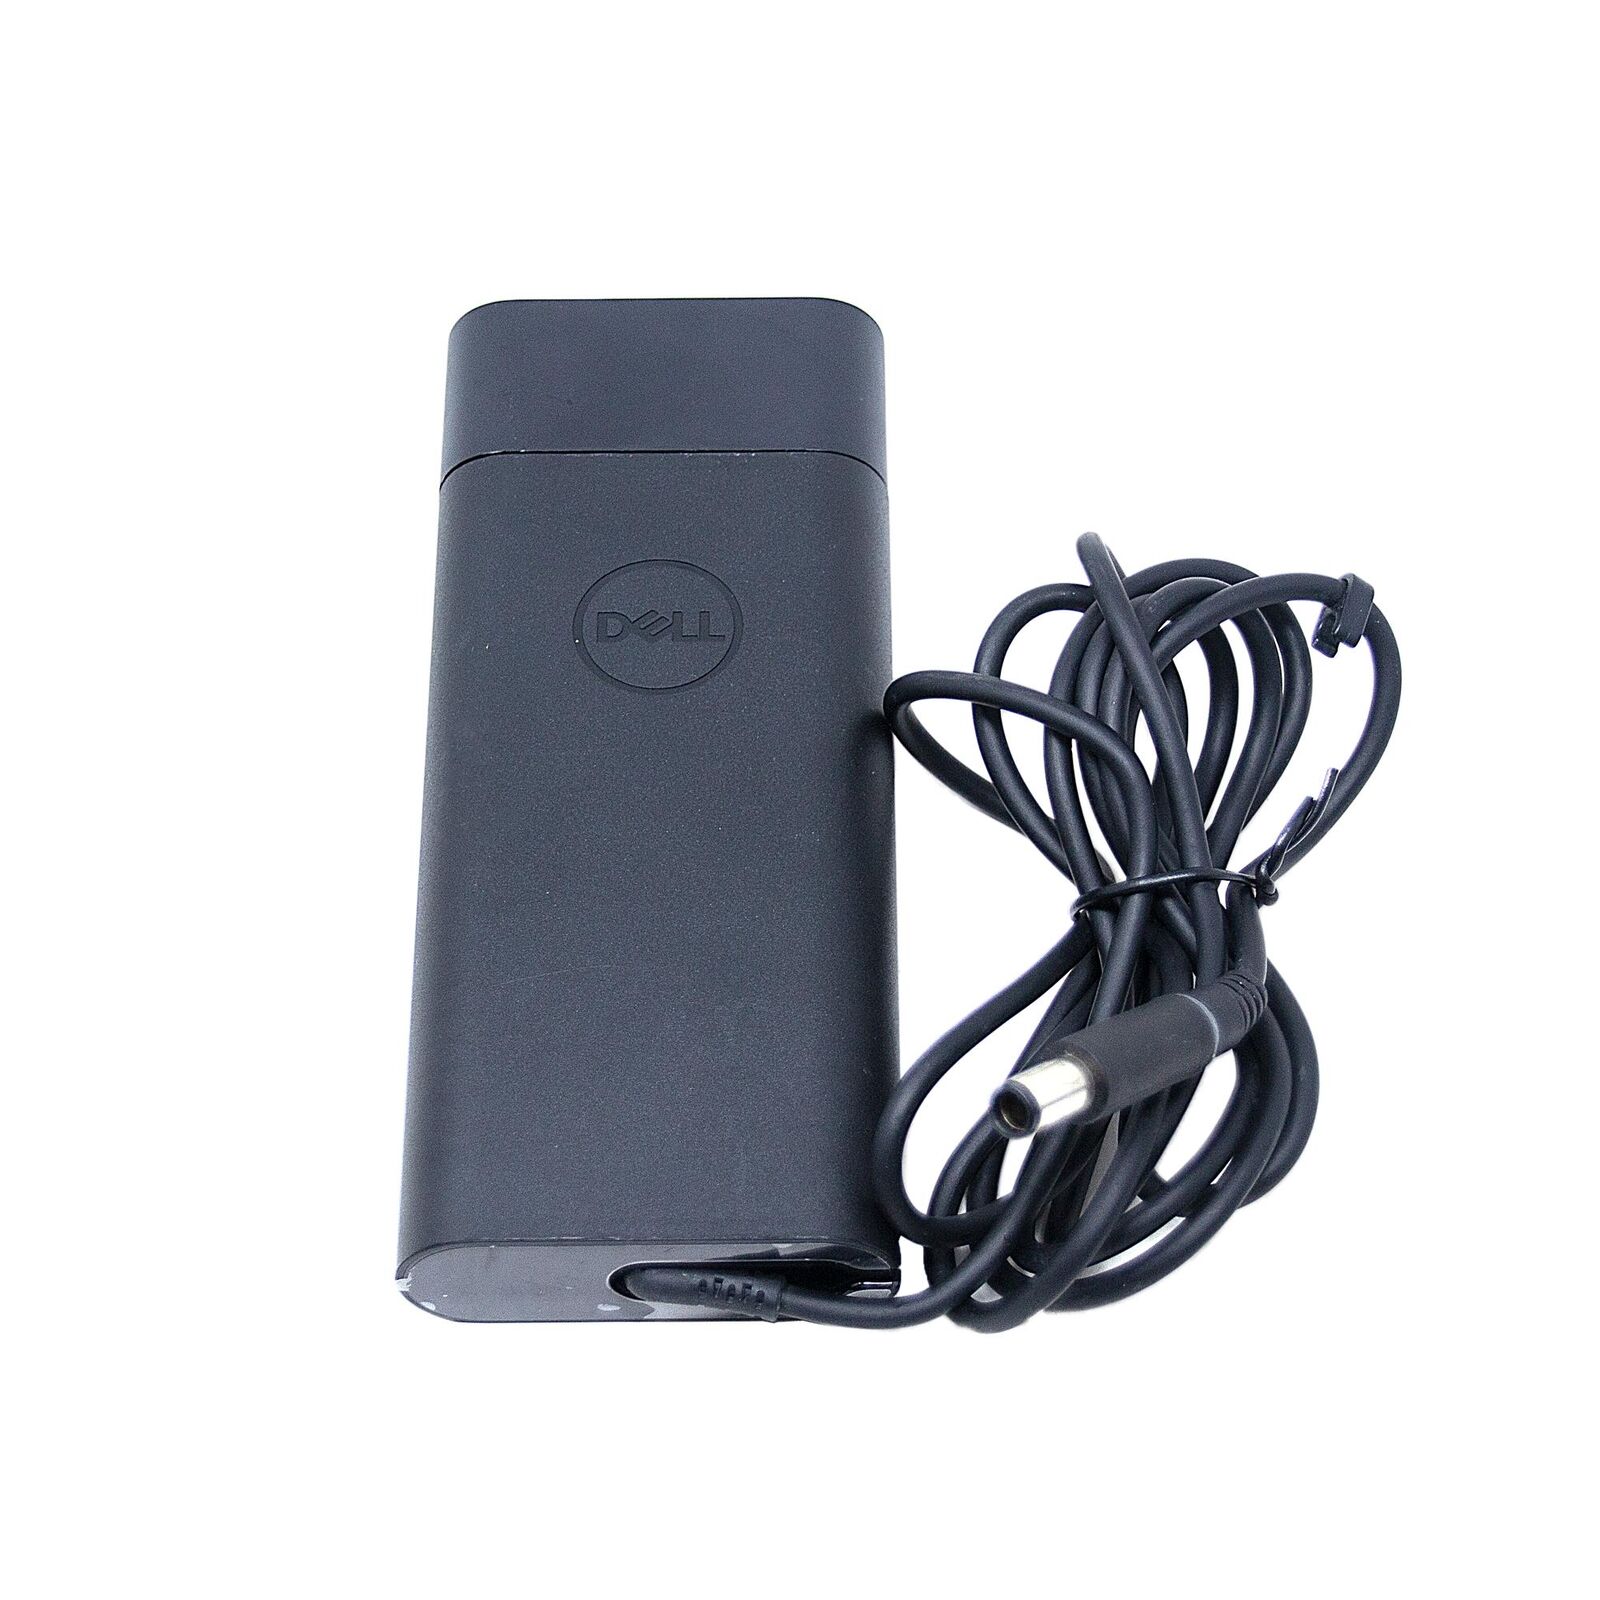 DELL Latitude 5300 2-in-1 P96G Genuine Original AC Power Adapter Charger